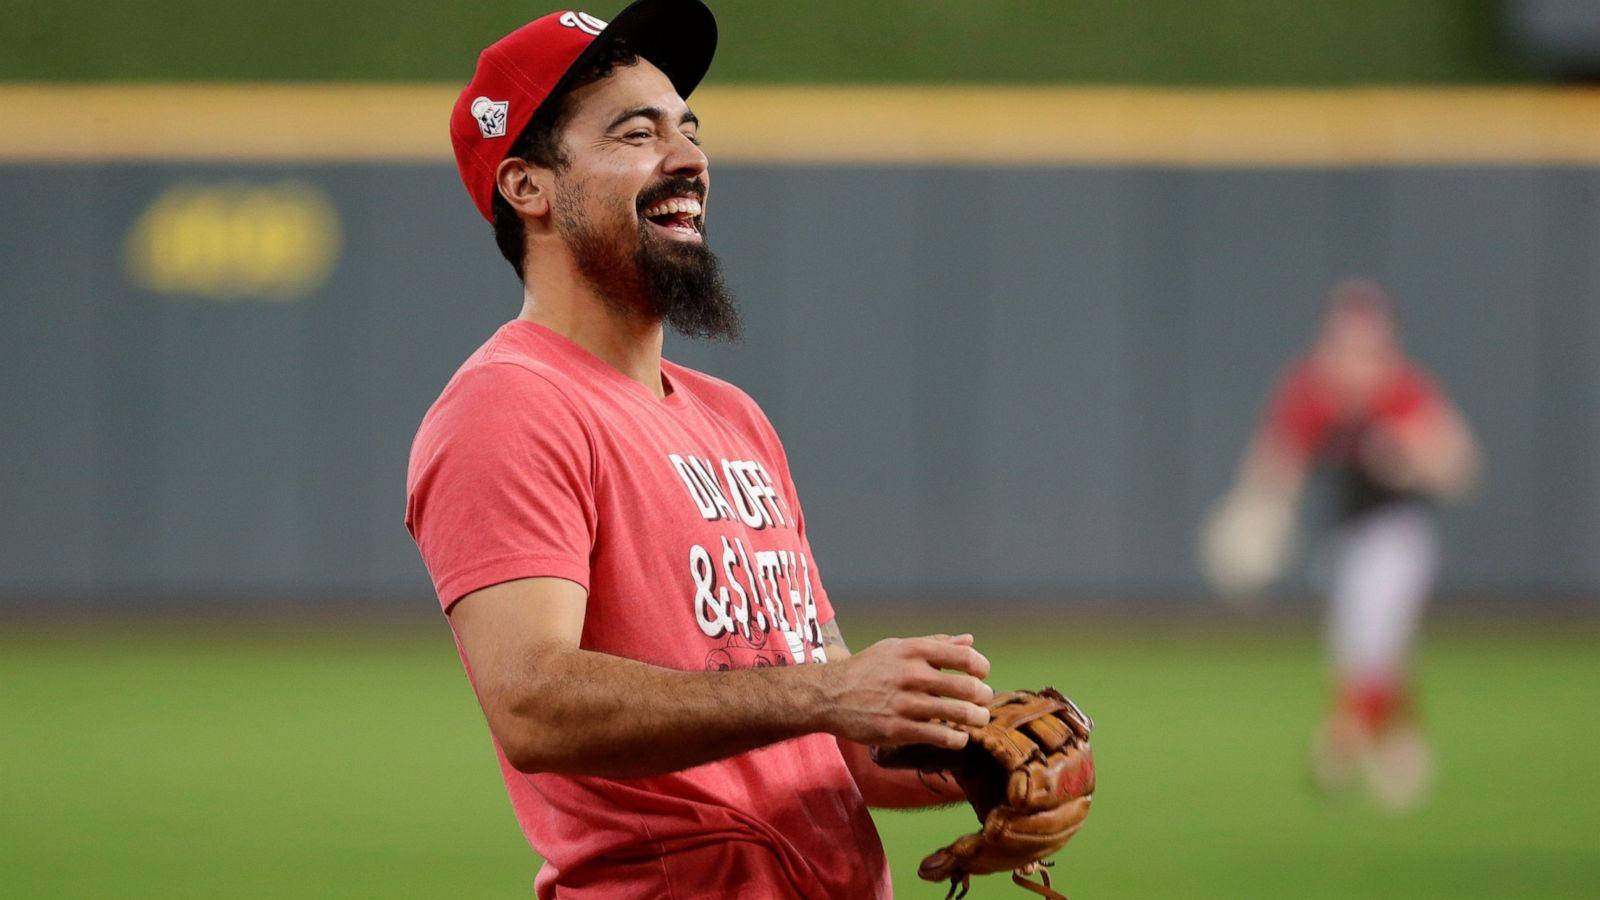 Anthony Rendon Laughing In Red Outfit Wallpaper